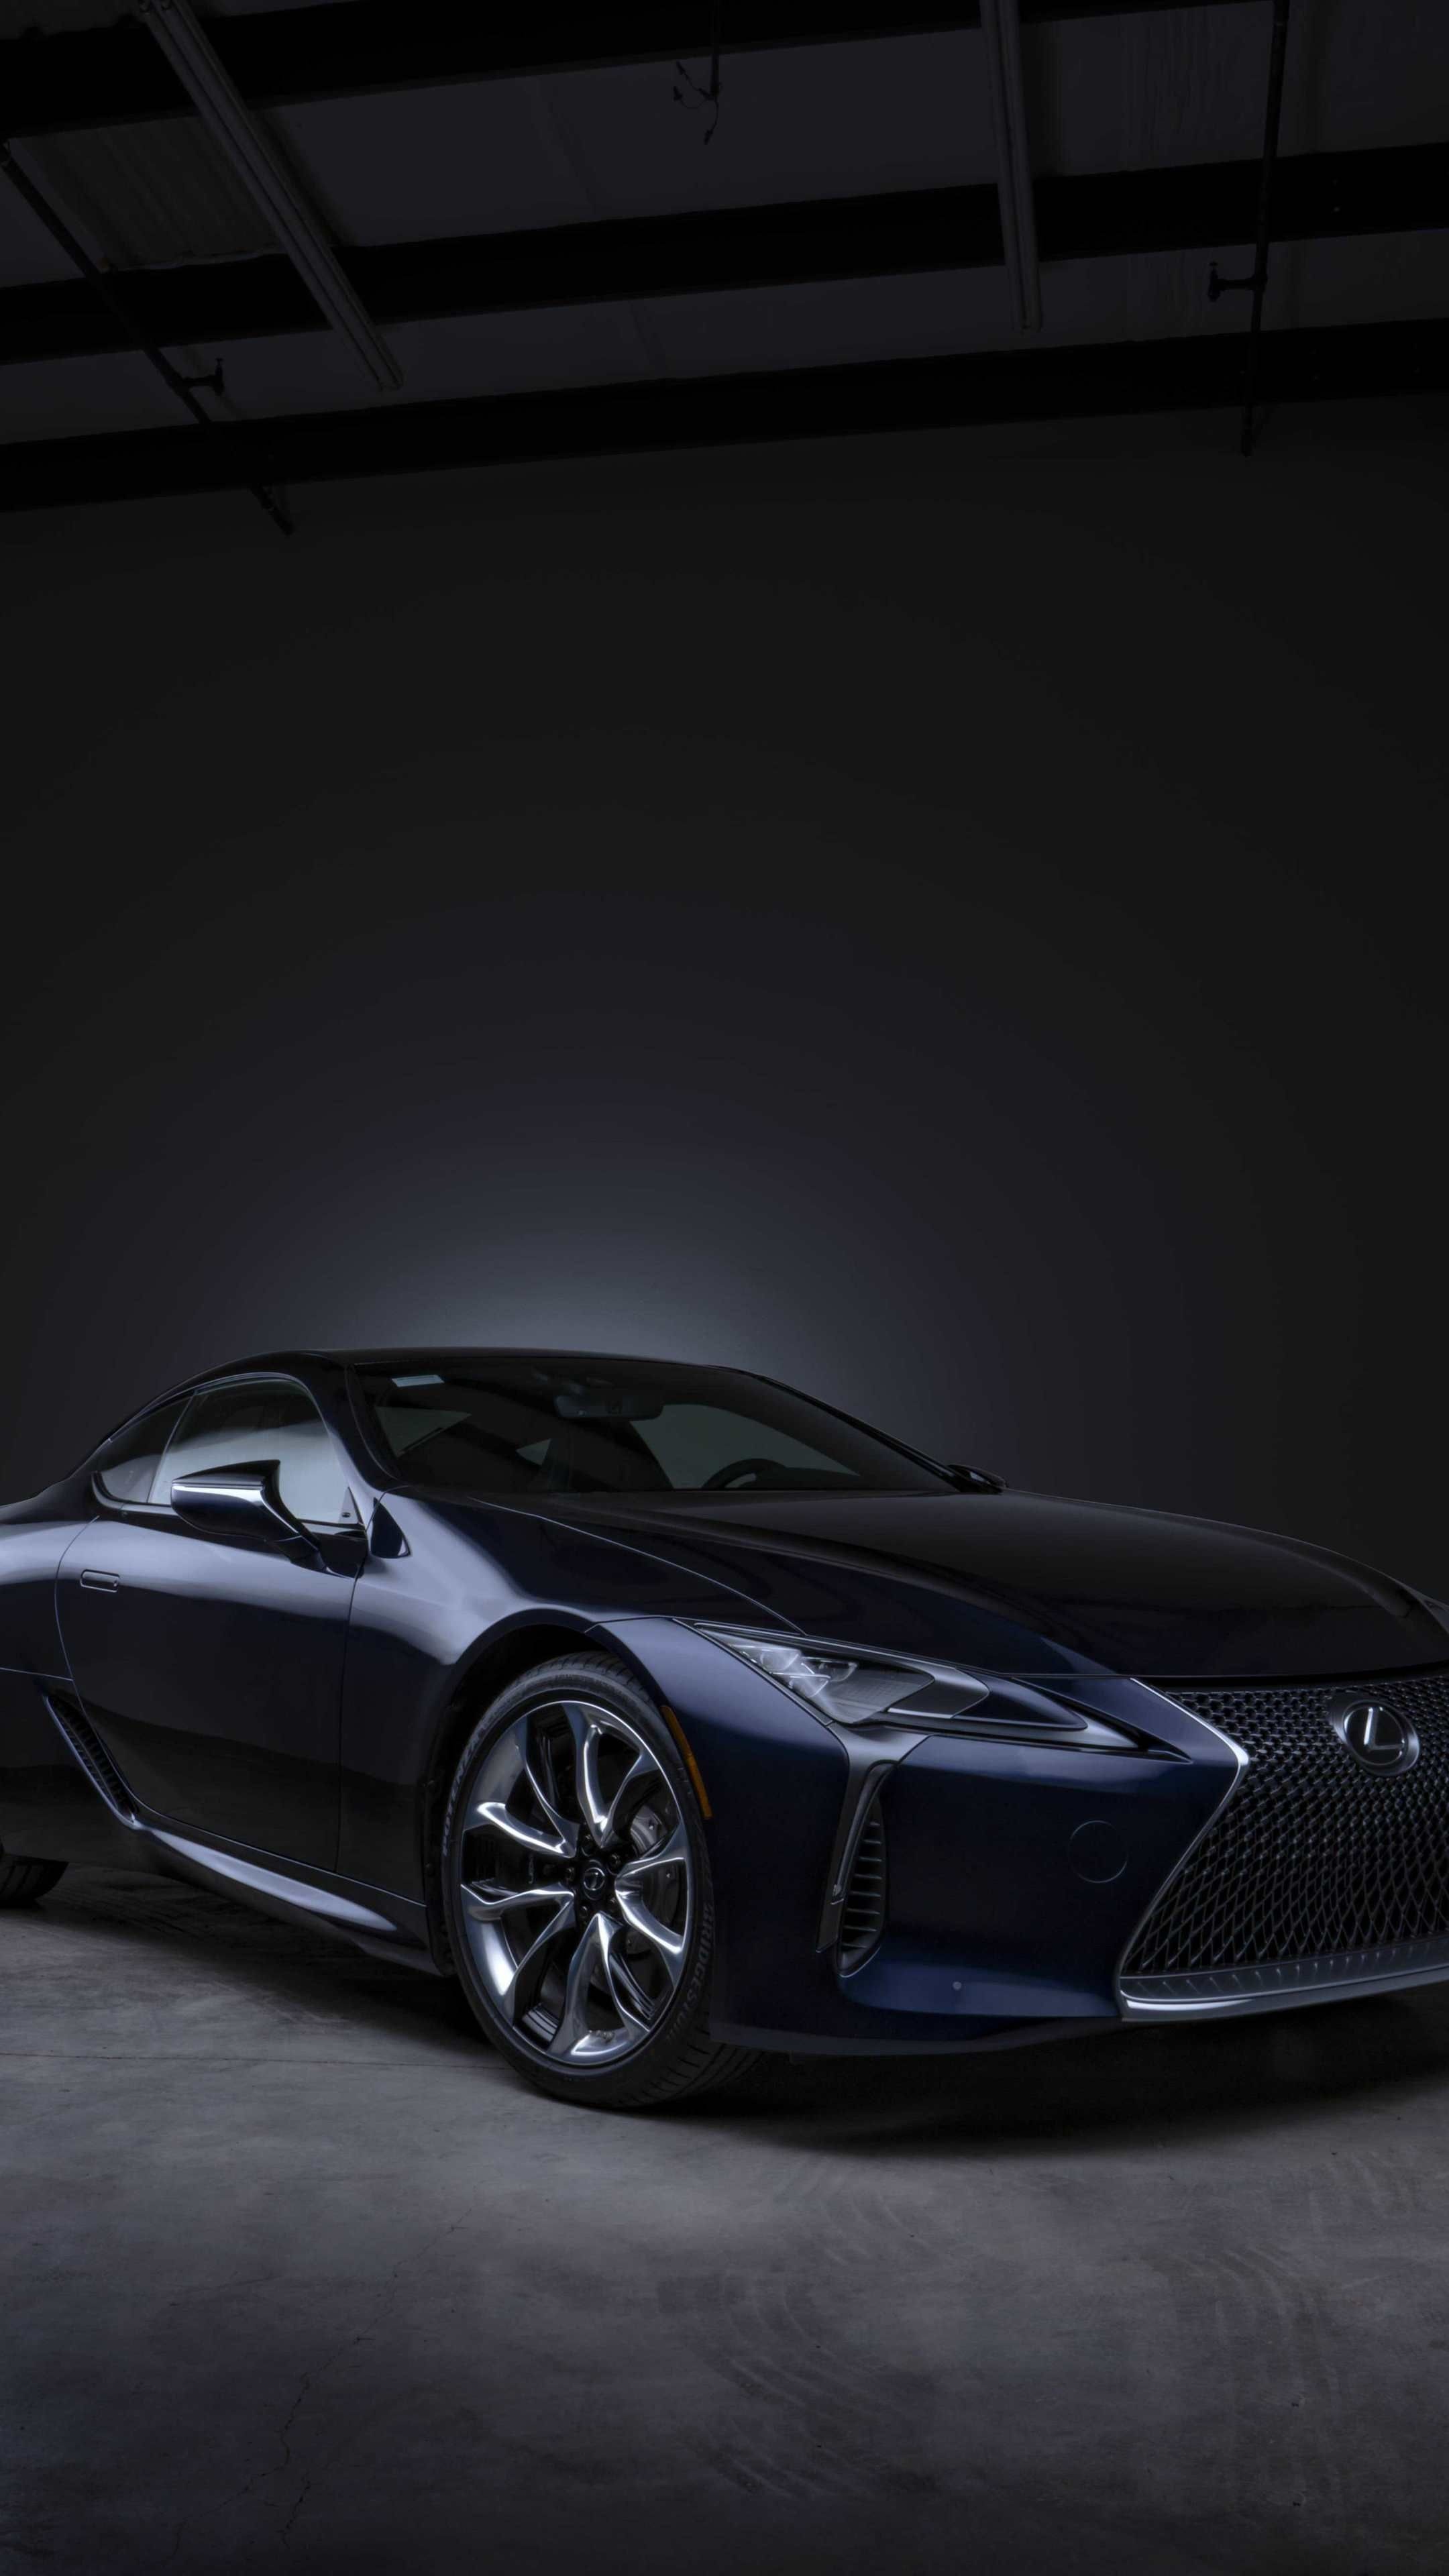 Lexus LC, Stylish and sporty, High-resolution wallpapers, Ultimate performance, 2160x3840 4K Phone